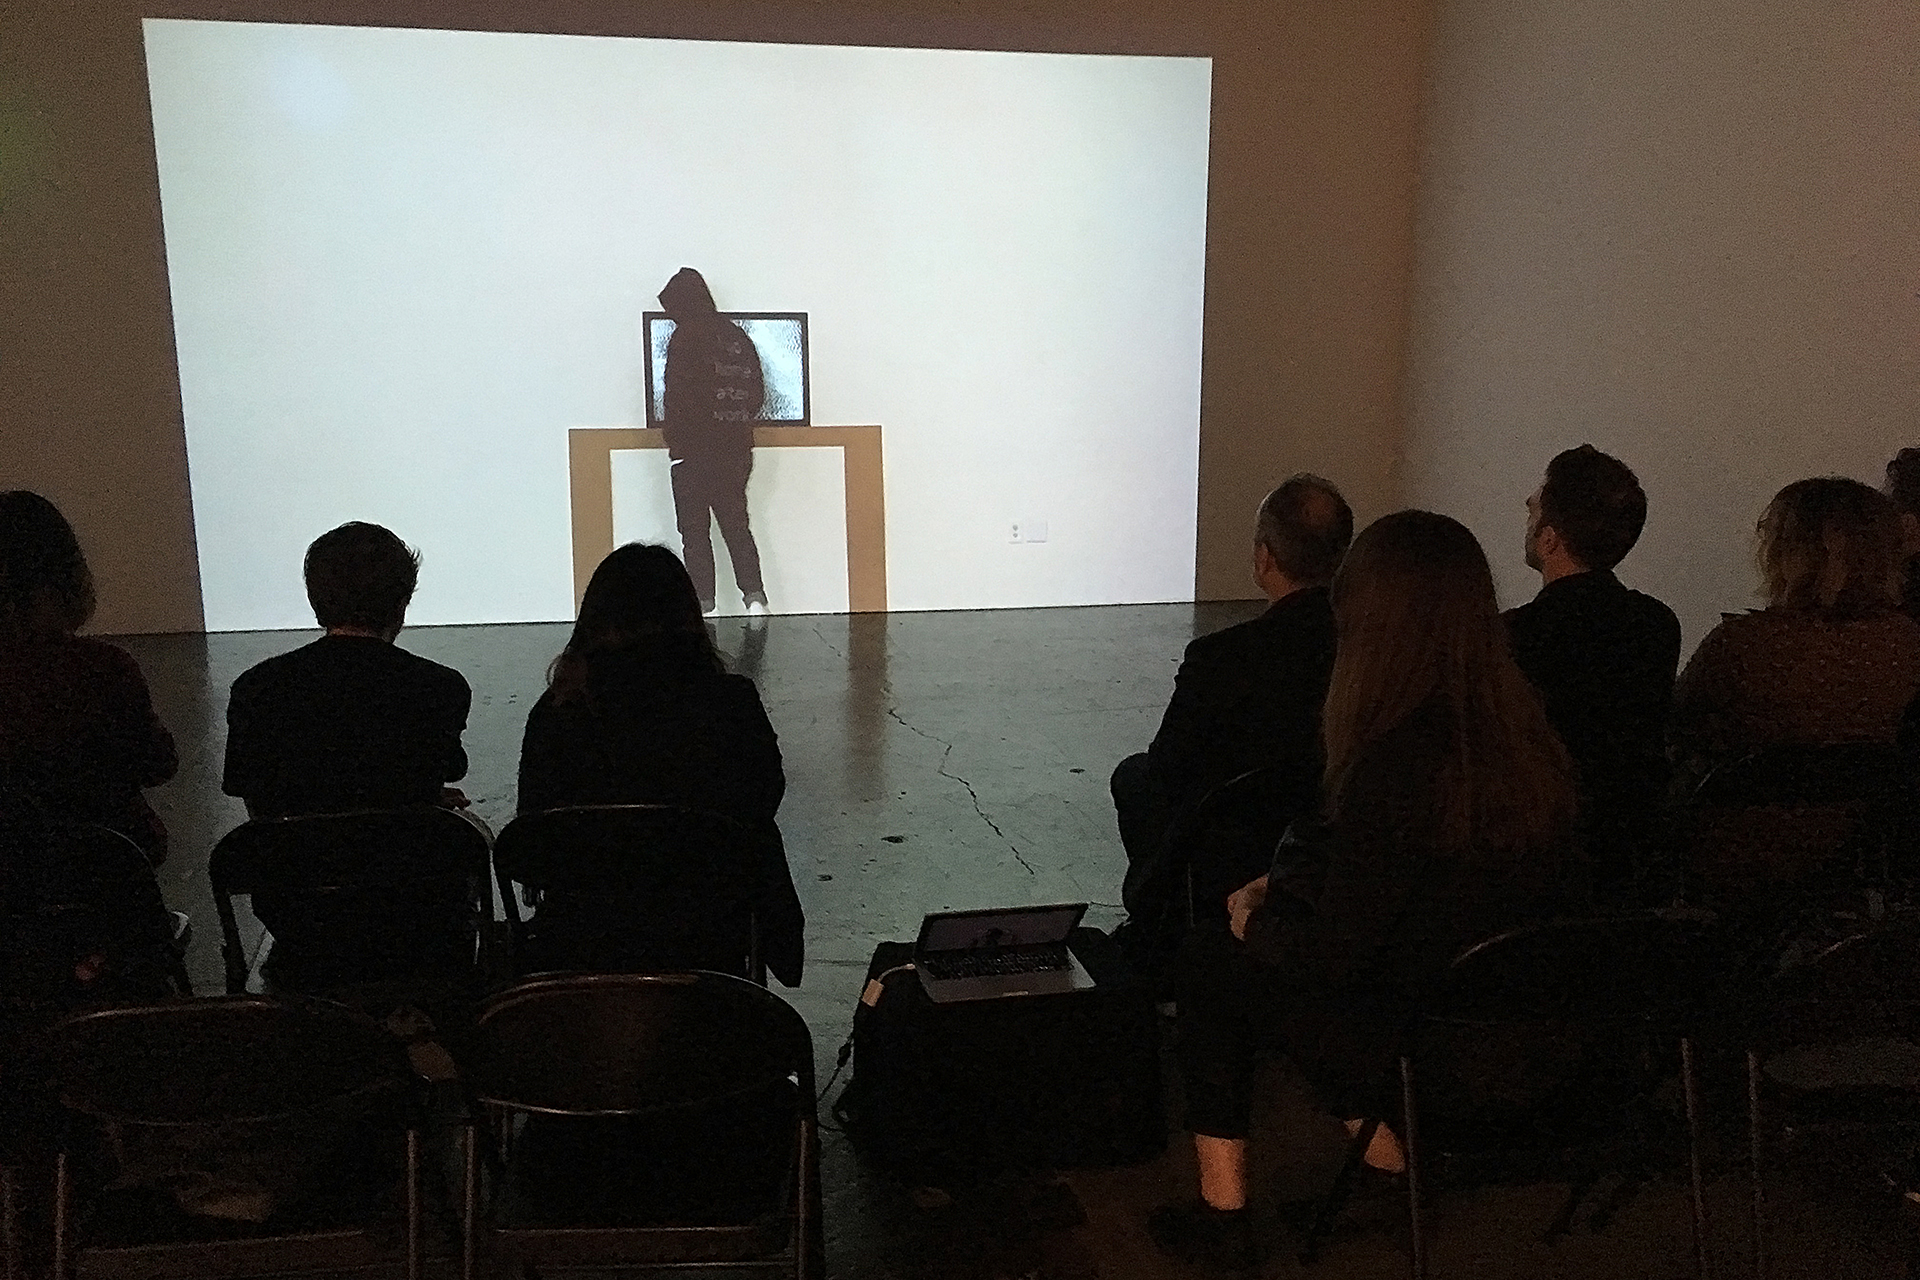 Installation within the space and with an audience audience